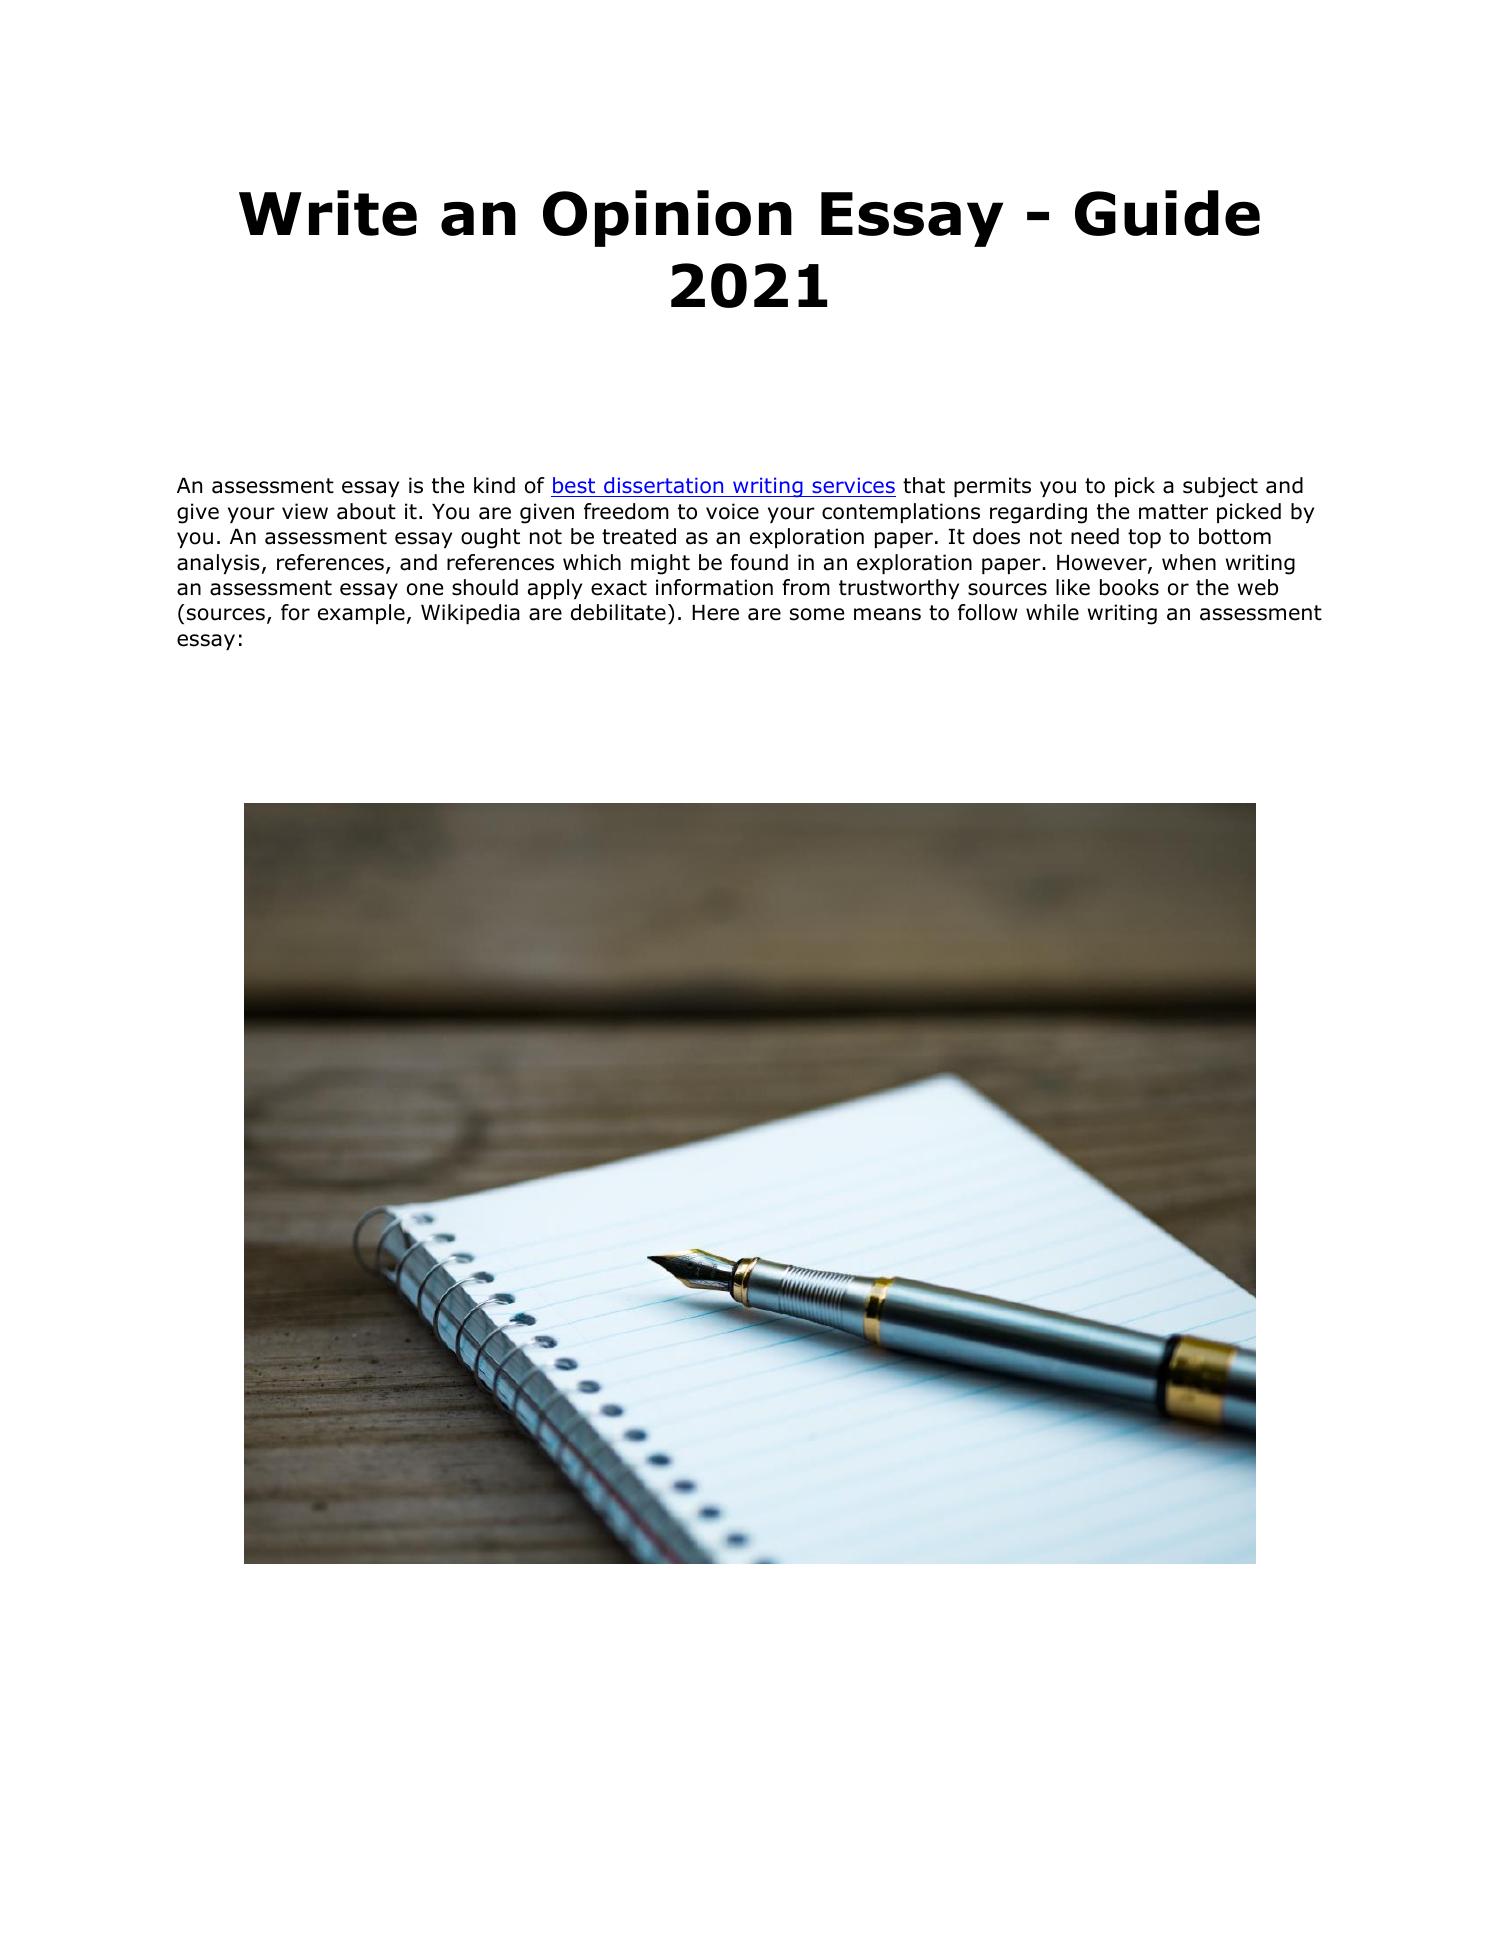 an opinion essay example pdf